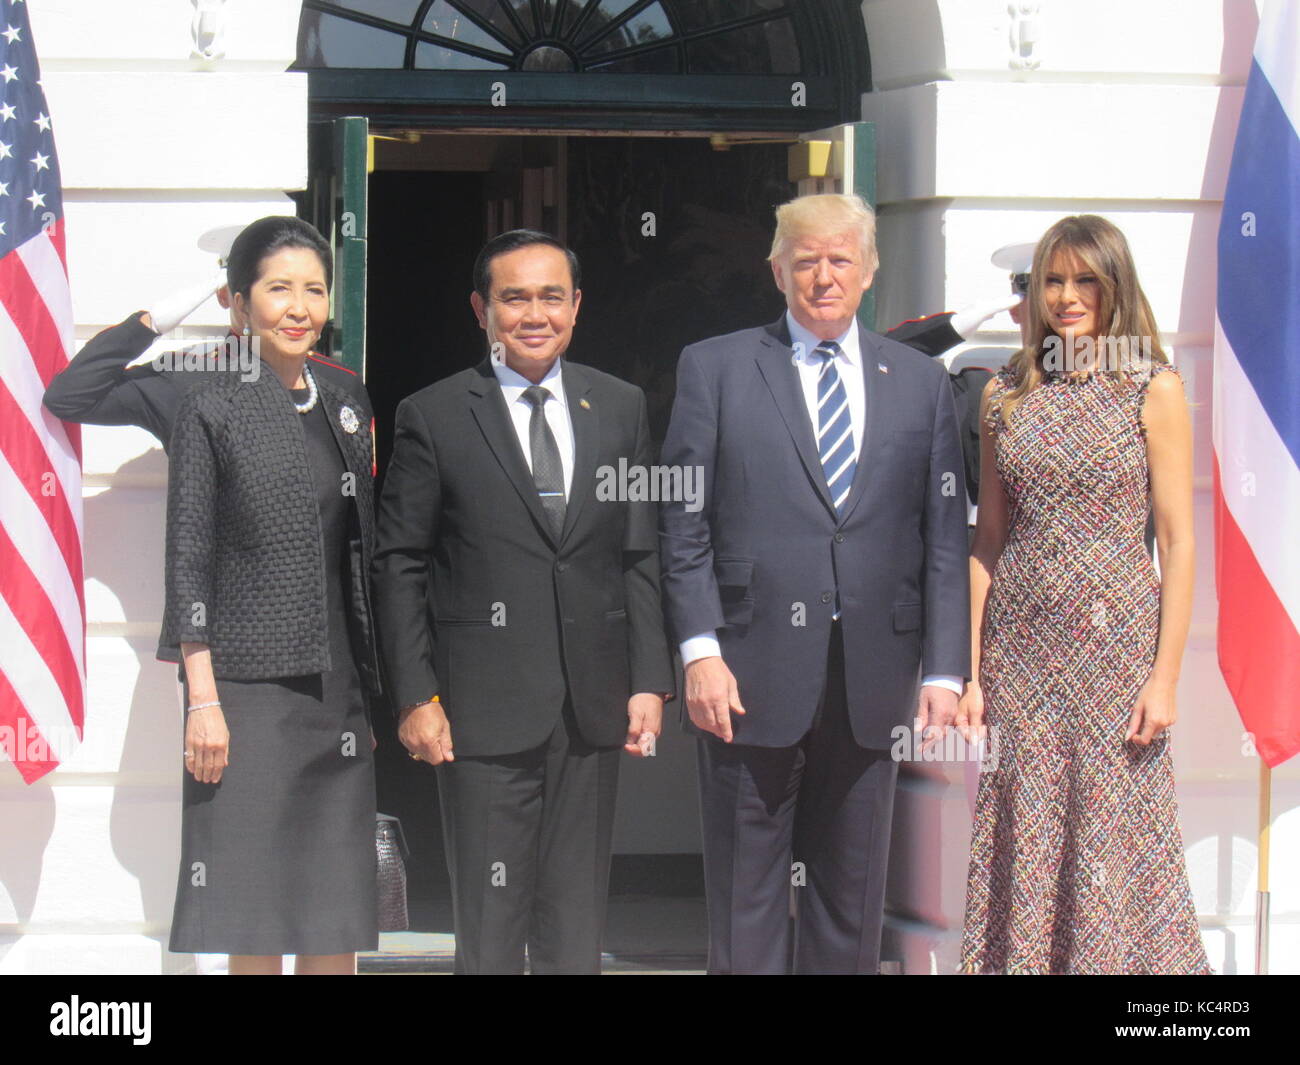 Washington, DC, USA; 02nd October, 2017: President Trump and First Lady Melania Trump welcome Prime Minister Prayut Chan-o-cha and Madam Chan-o-Cha of Thailand at the White House in Washington, DC, USA. Credit: Kyle Mazza/Alamy Live News. Stock Photo